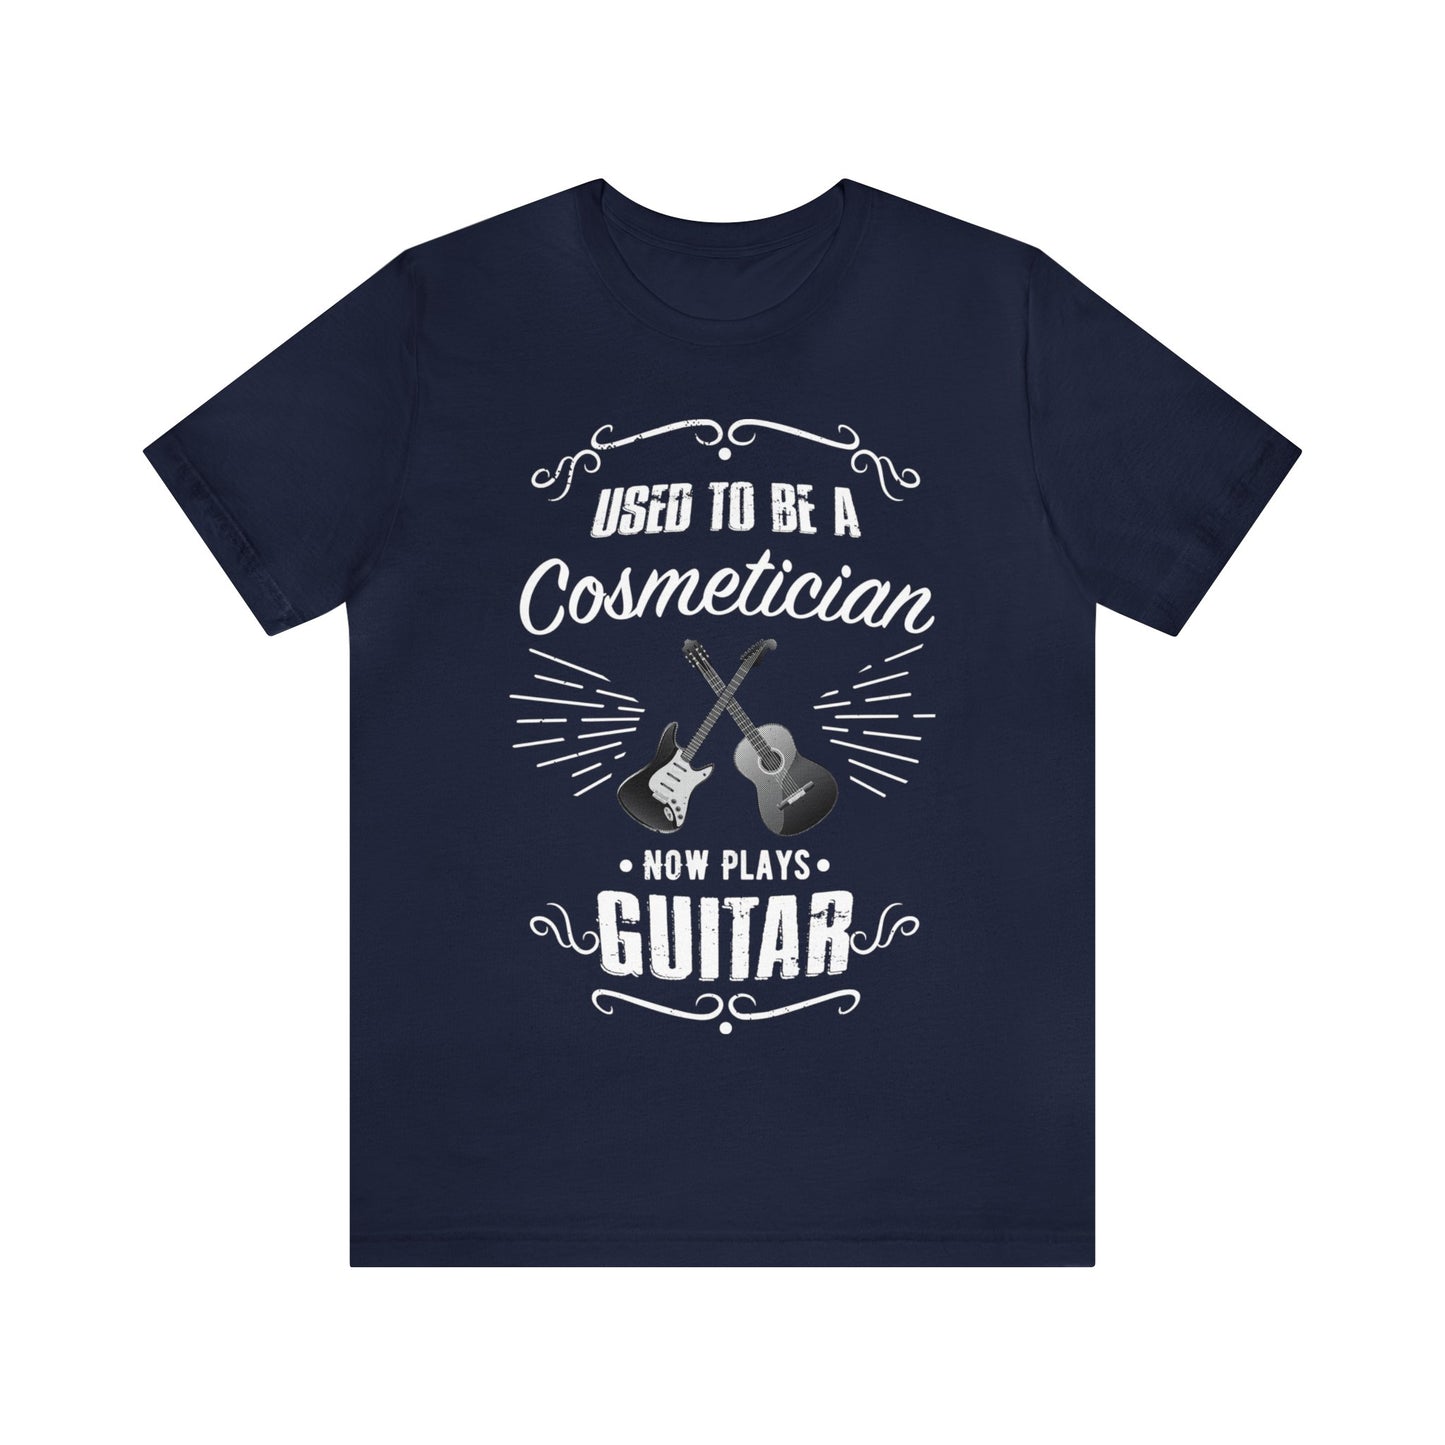 Used to be a COSMETICIAN; Now Plays GUITAR - Funny Retirement Gift, Unisex T-shirt Bella+Canvas 3001, dark shirt colors for amateur musician/guitar player